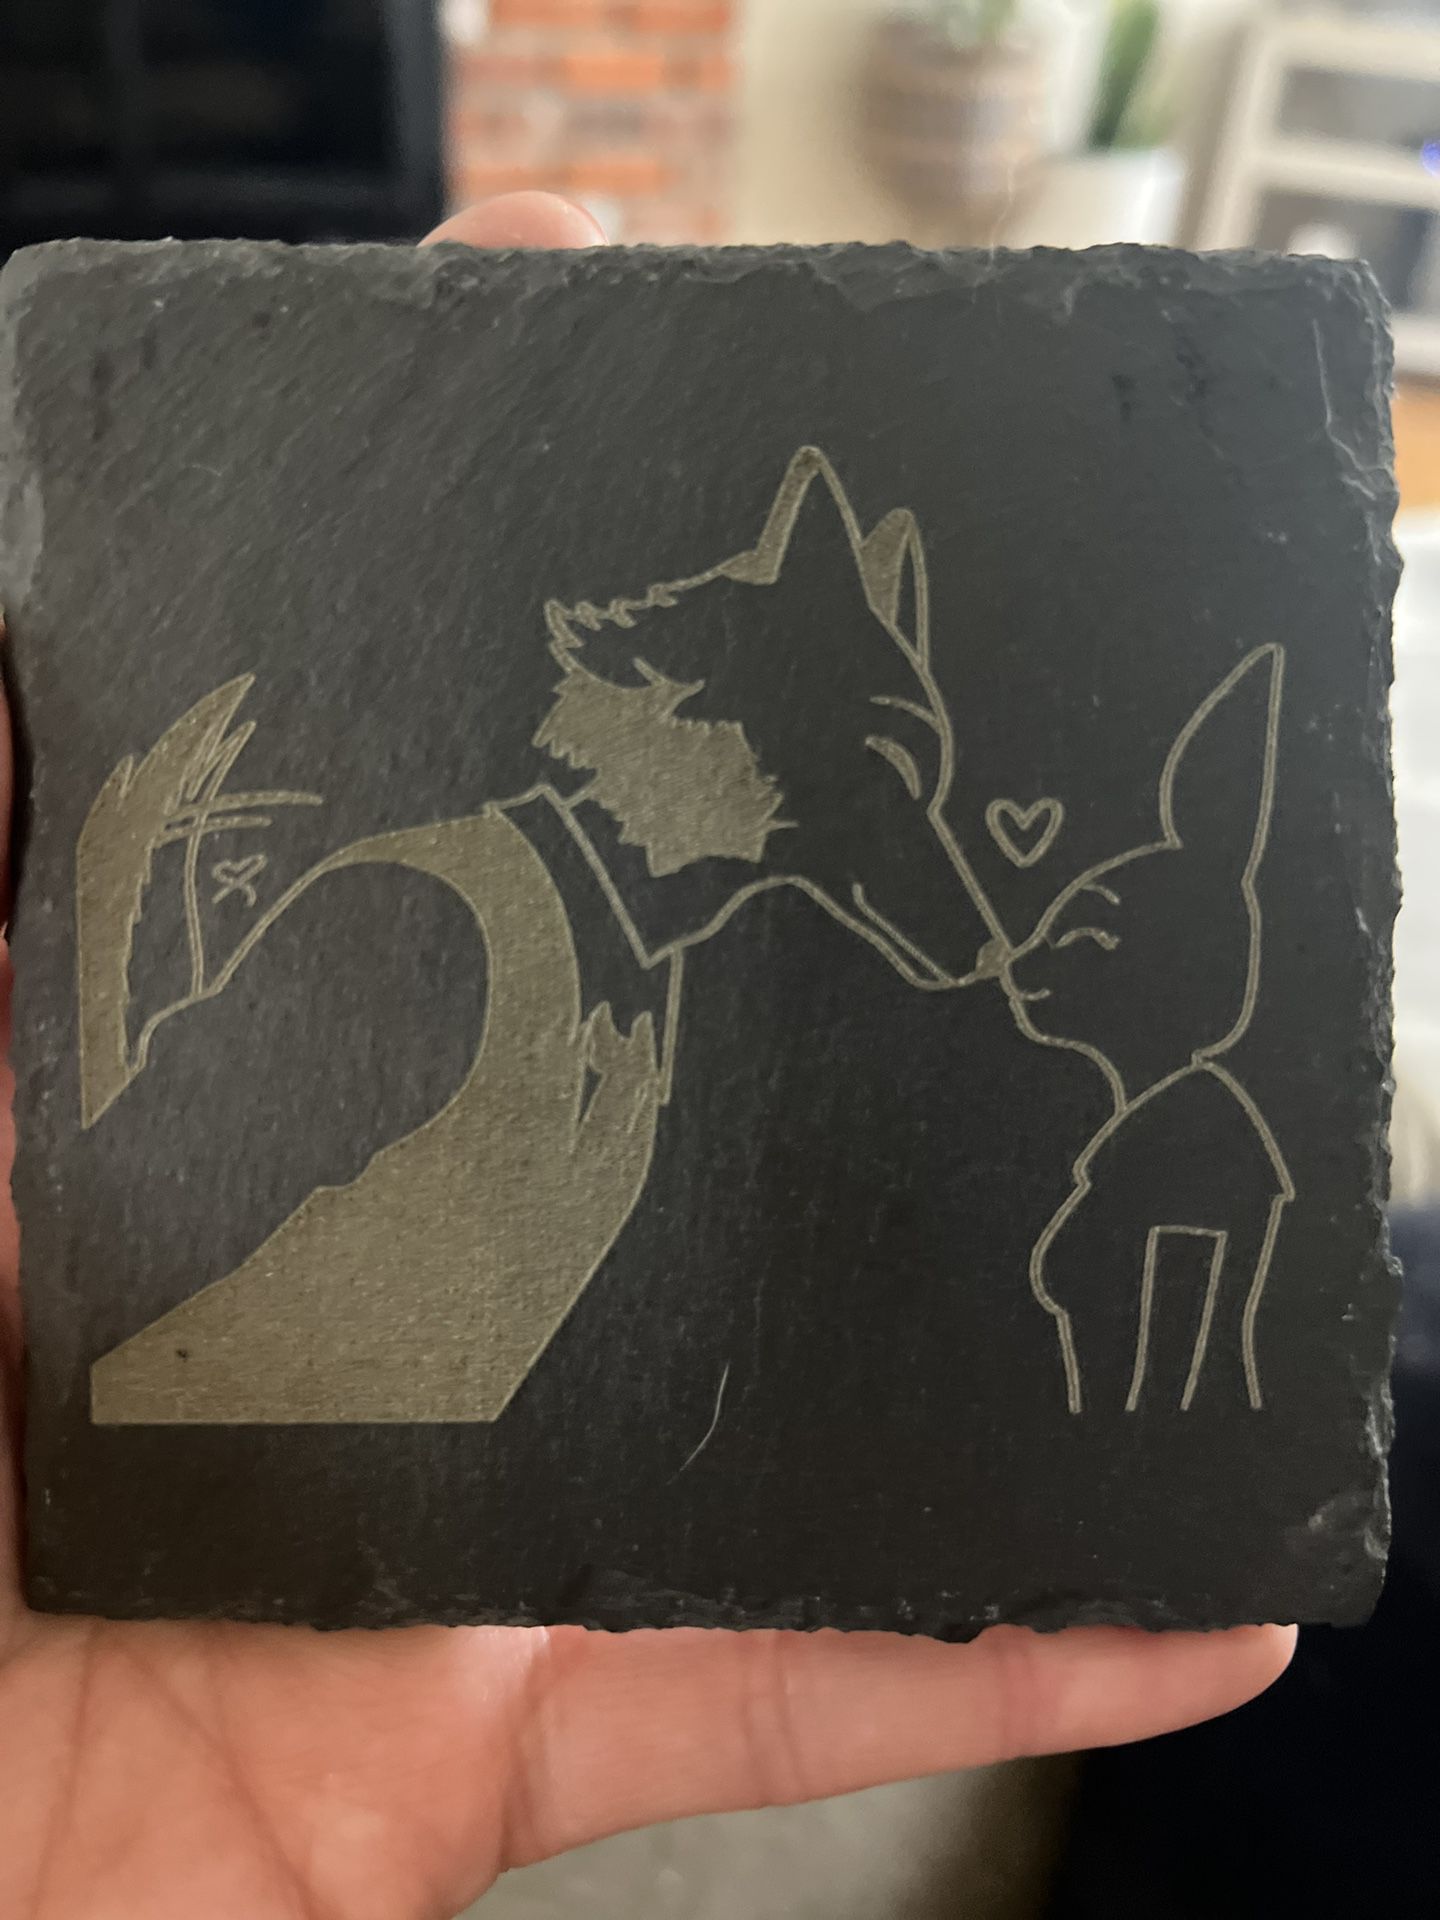 Engraved Personalized Slate Coasters! Any Material! Made To Order